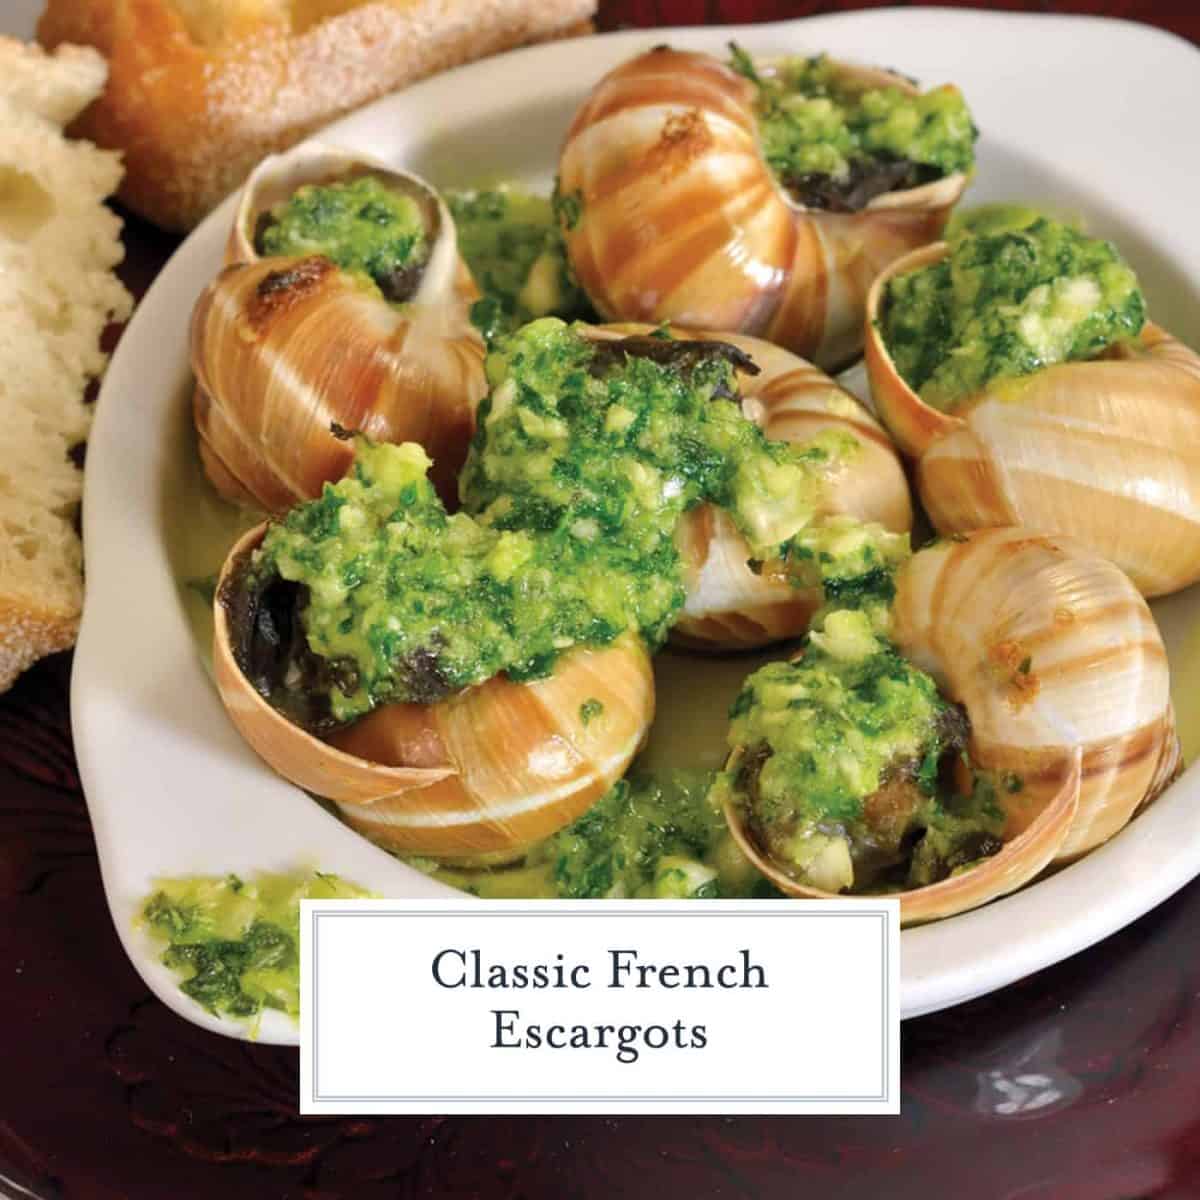 Classic French Escargots How To Make Escargot With Garlic Butter